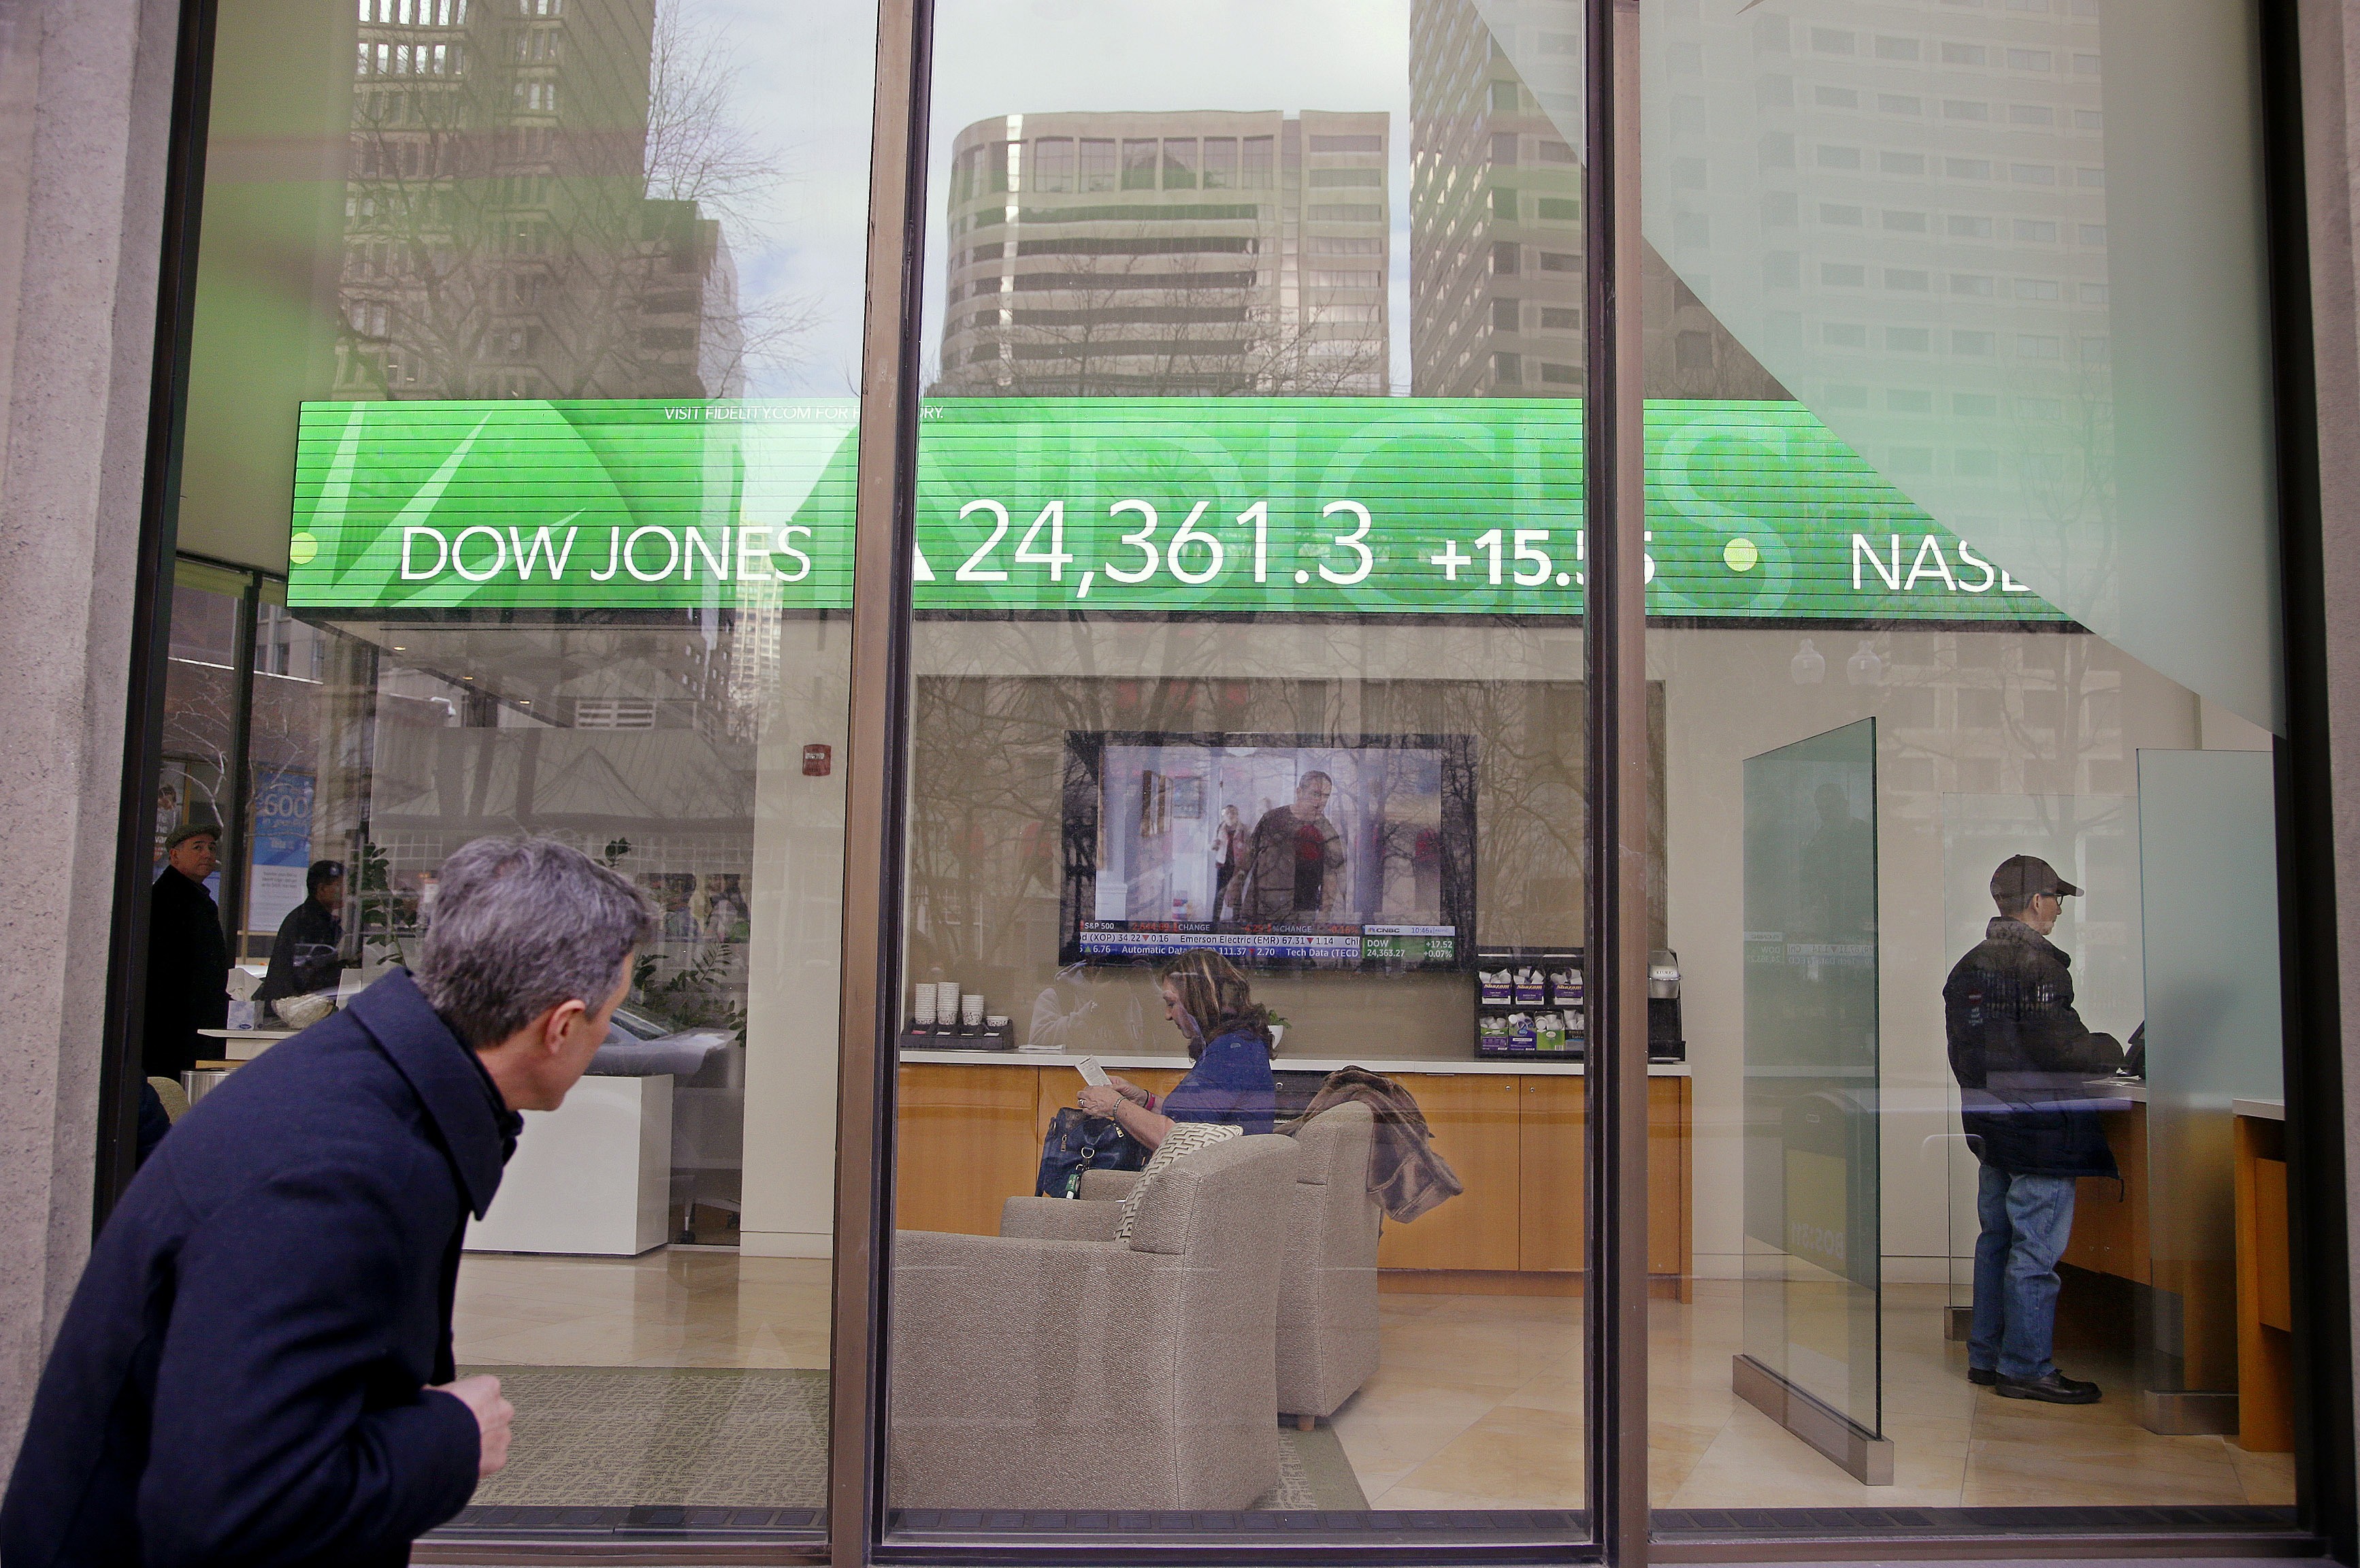 A passer-by peers in the window, while investors congregate inside at the Fidelity Investments office as the ticker displays stock market numbers. Over the last 10 years, passive indexing has crowded out active managers without any reversal in sight. Perhaps, suggests Peter Guy, recent market events and fund industry changes will revive active managers. Photo: AP